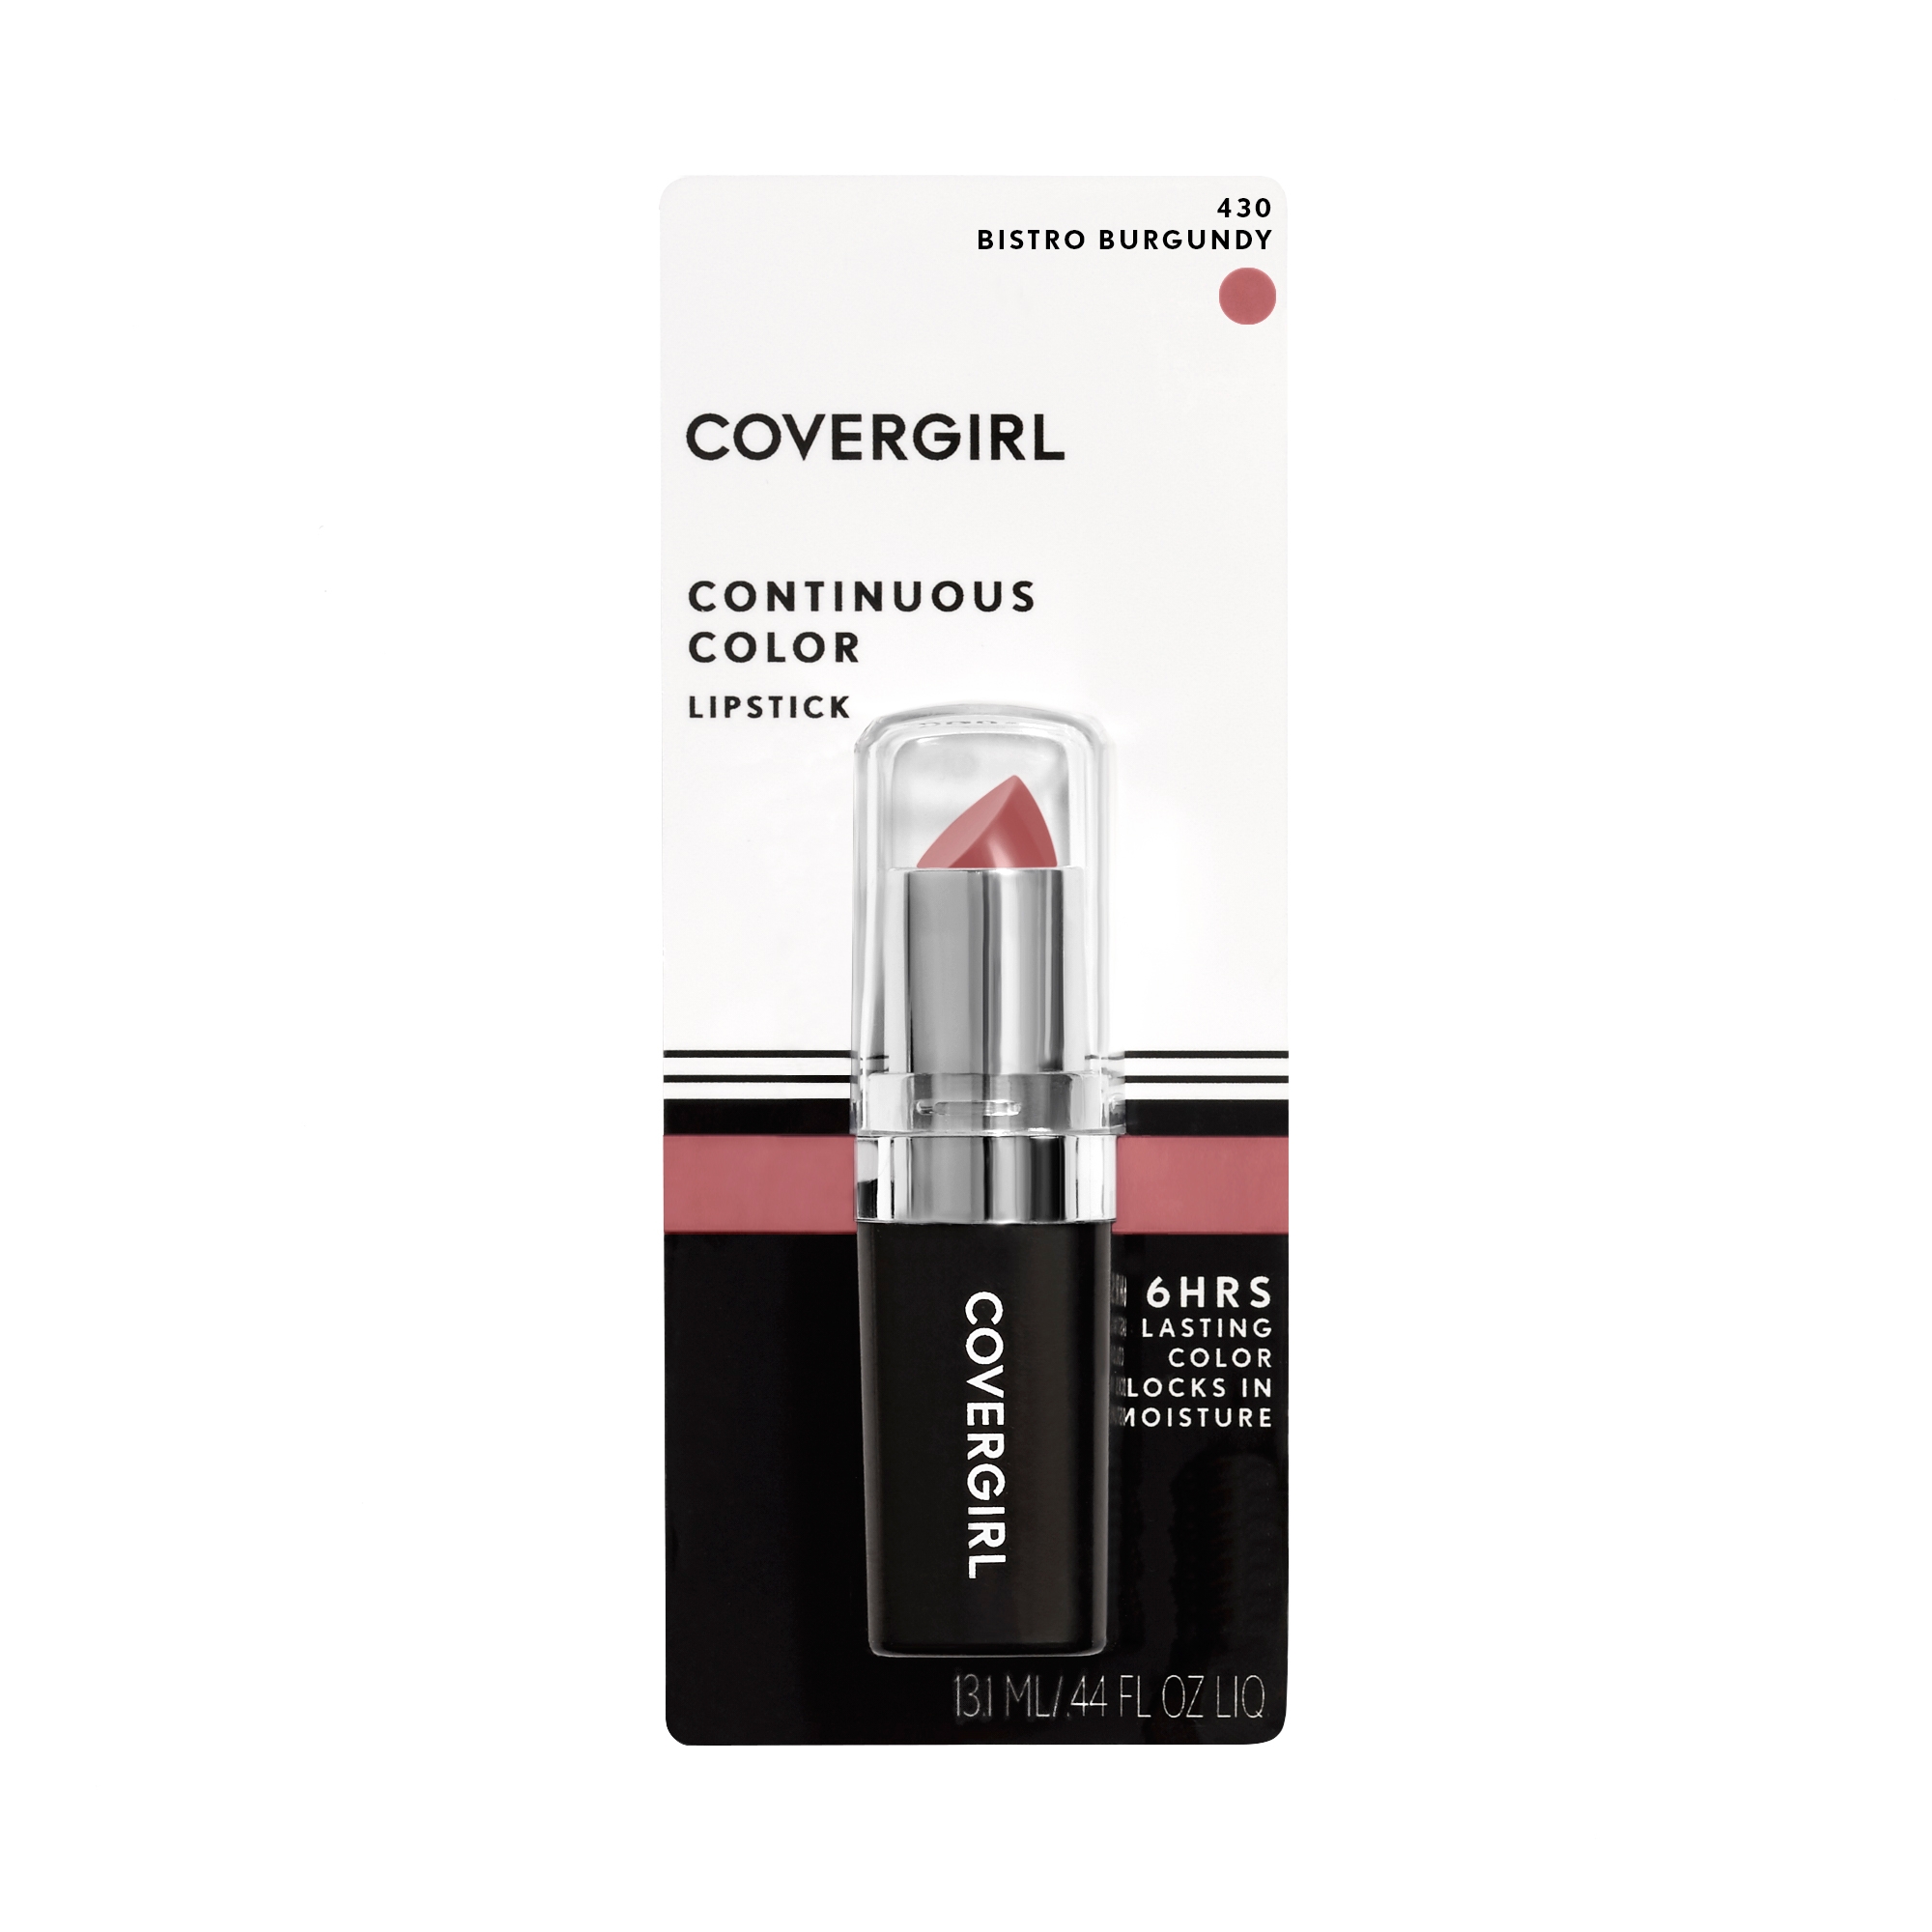 COVERGIRL Continuous Color Lipstick, 430 Bistro Burgundy, 0.13 oz, Moisturizing Lipstick, Long Lasting Lipstick, Extended Palette of Shades, Keeps Lips Soft - image 3 of 5